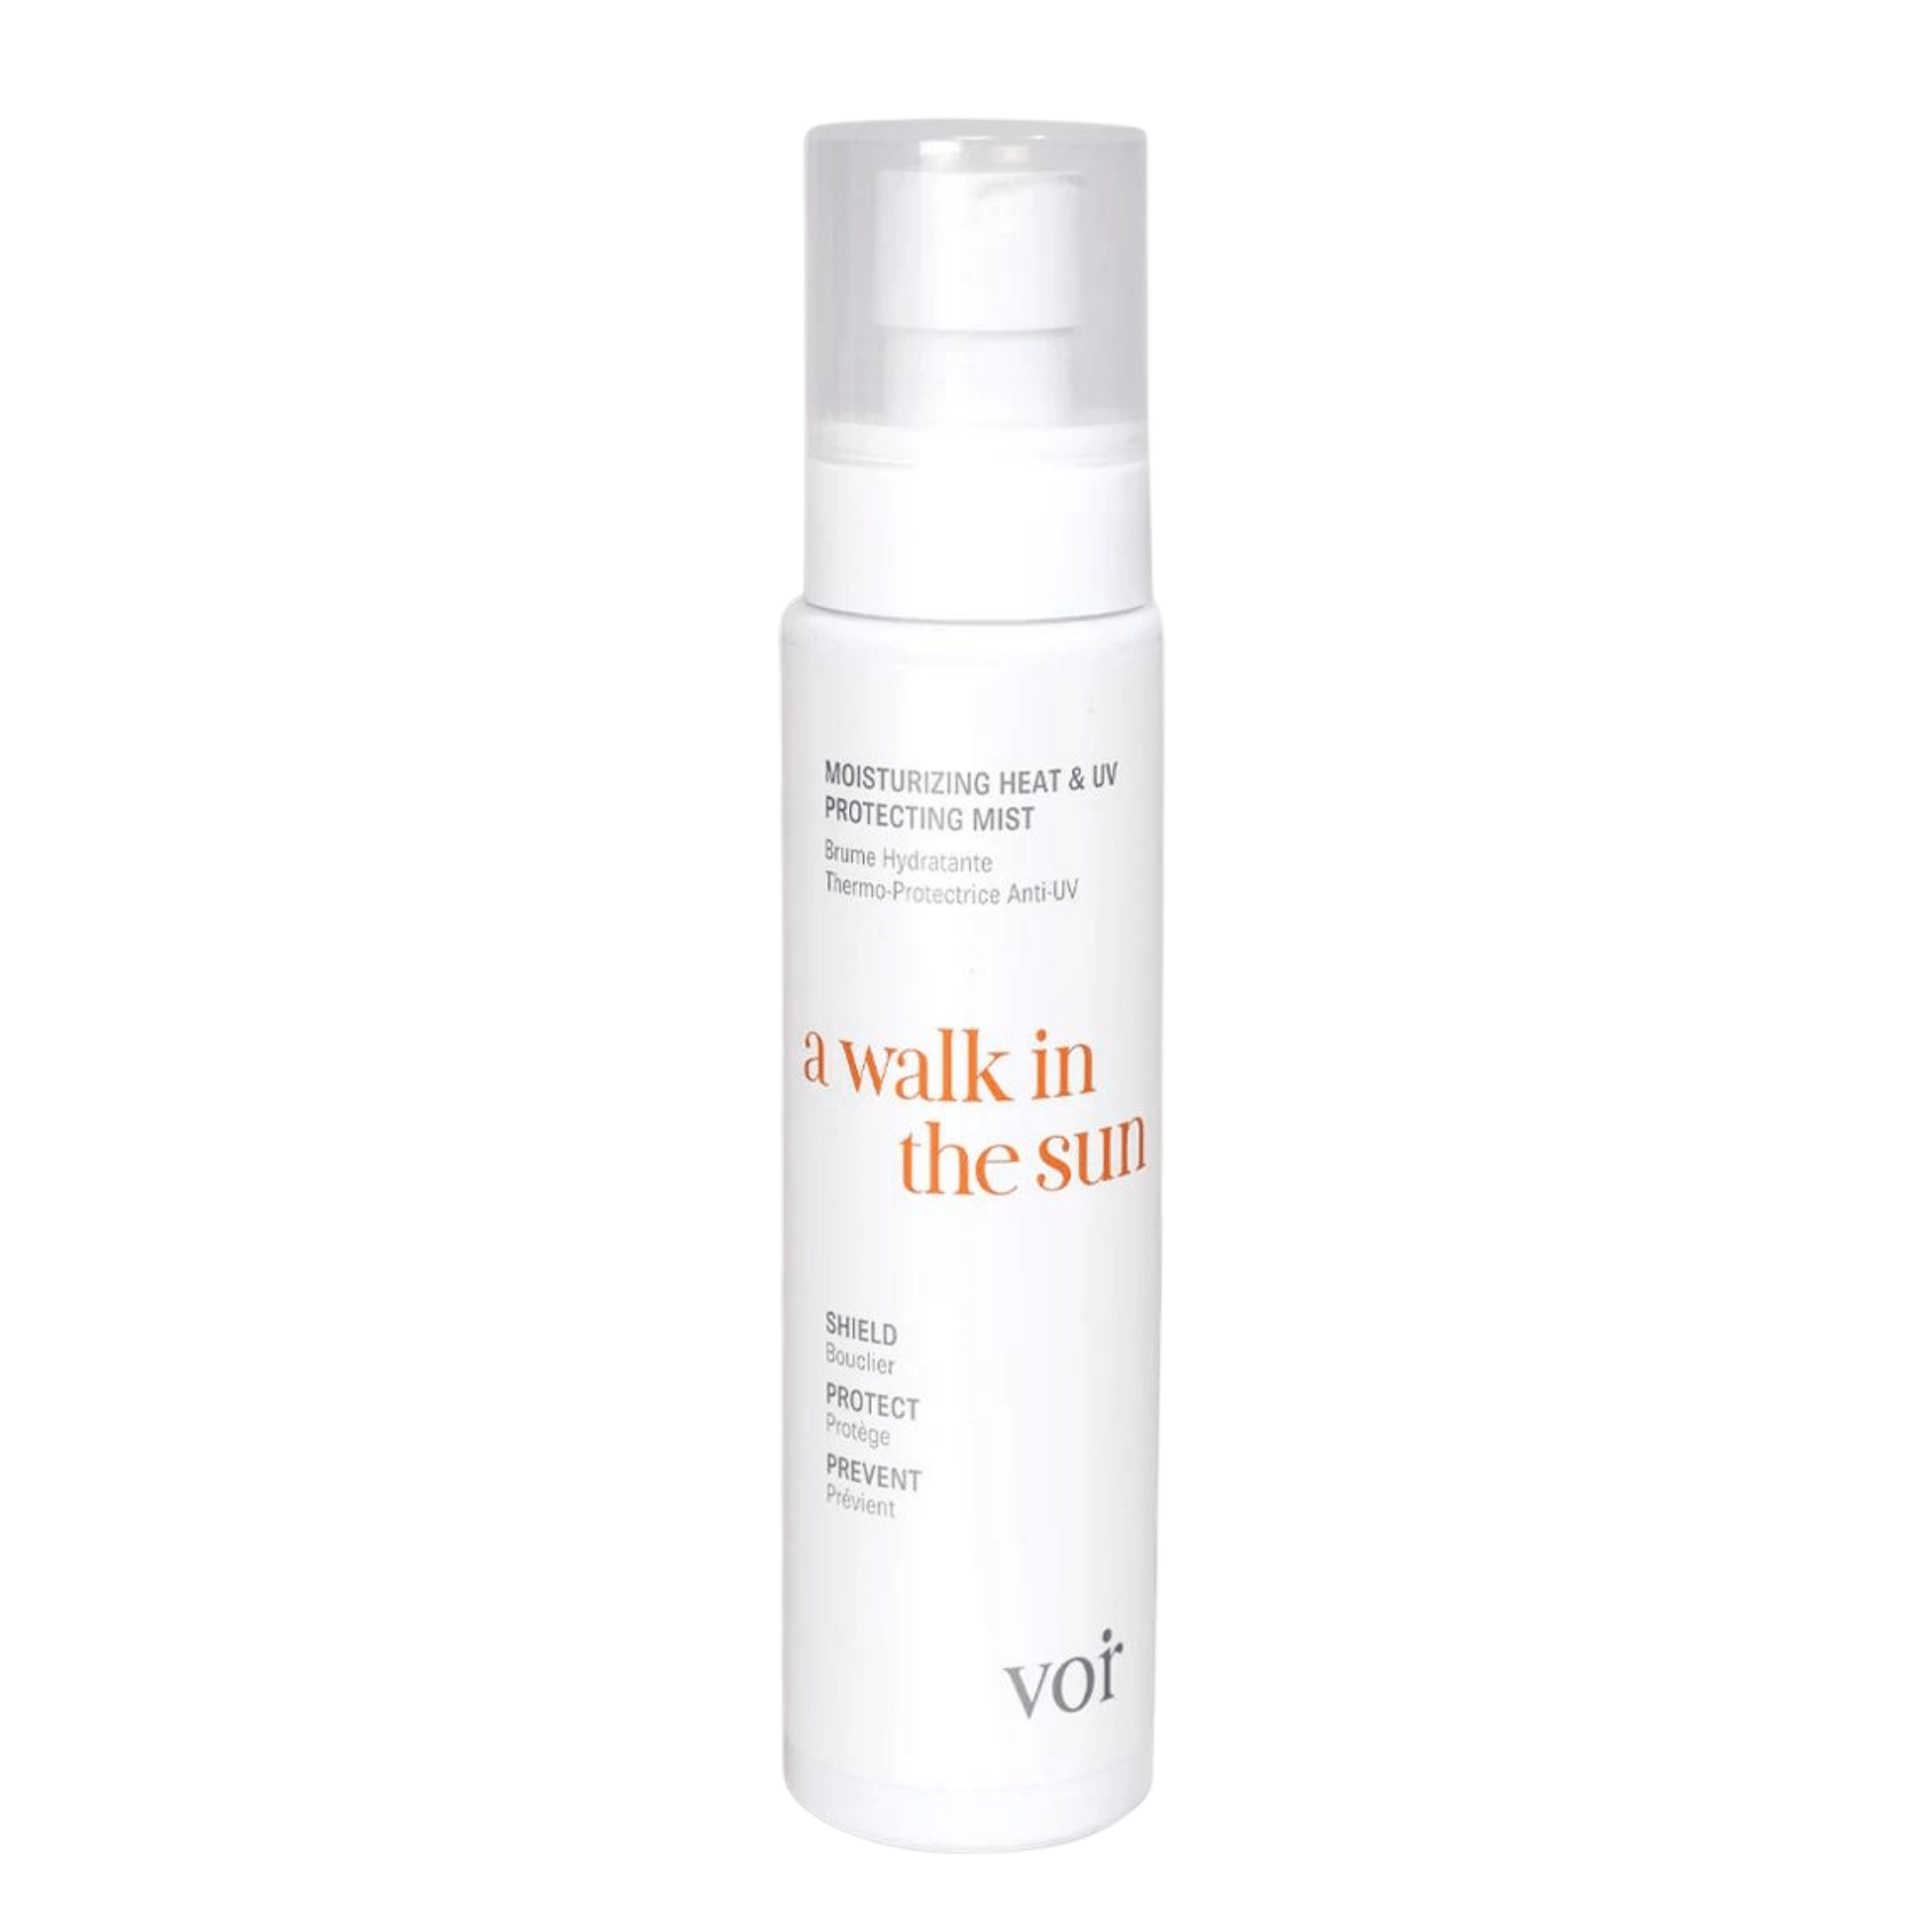 Voir. Brume Hydratante Thermo-Protectrice A Walk in the Sun - 150 ml - Concept C. Shop